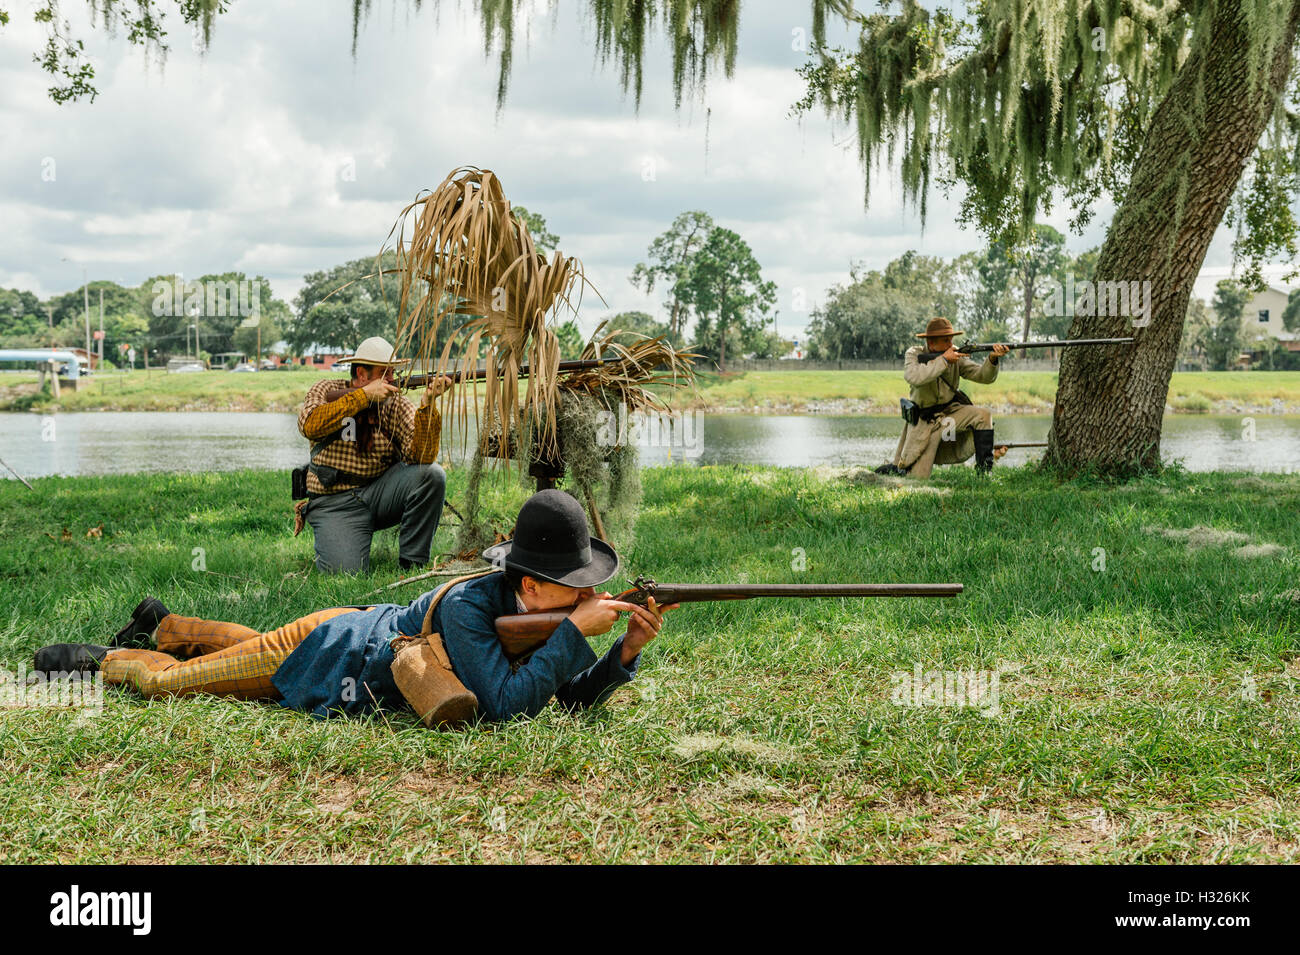 U.S. Civil War actors in a reenactment of the 'Battle of Tampa', in 1862. The actors represented both Union and Confederate soldiers. Stock Photo